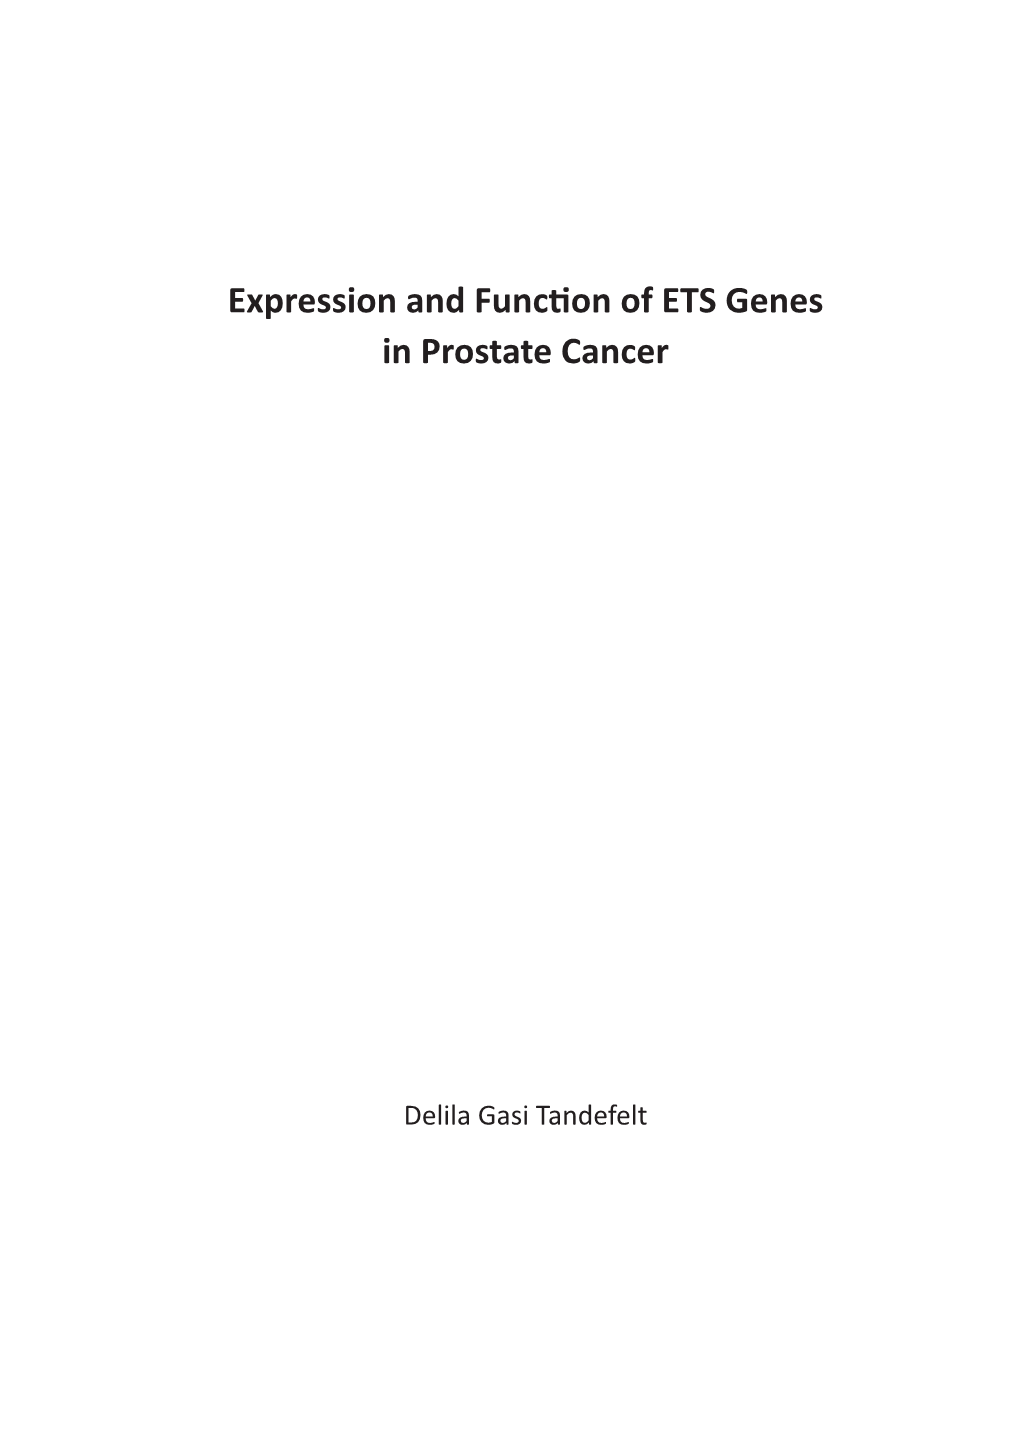 Expression and Function of ETS Genes in Prostate Cancer